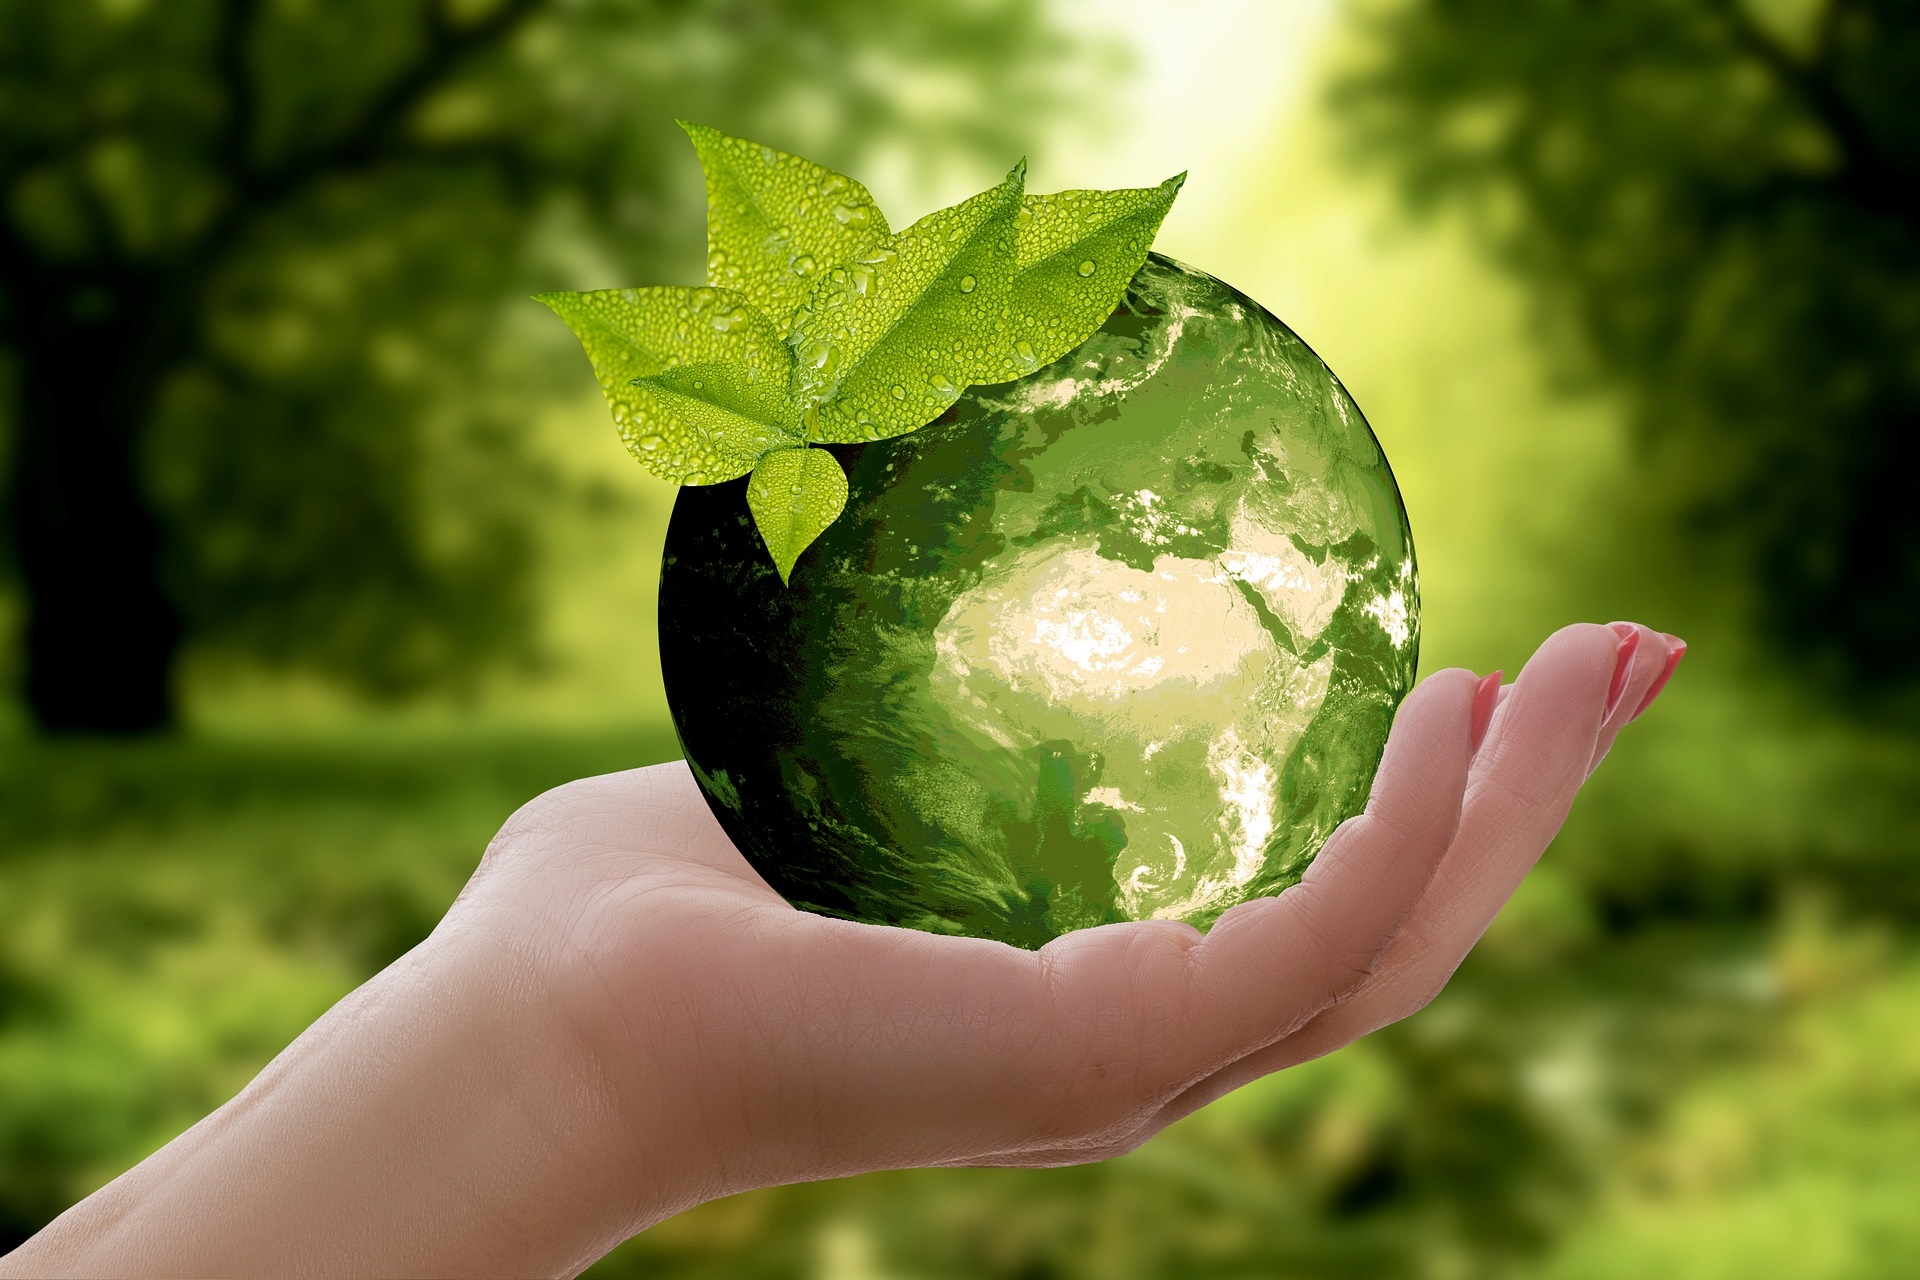 a hand holding a green globe symbolizing we need to refocus on recycling plastic packaging